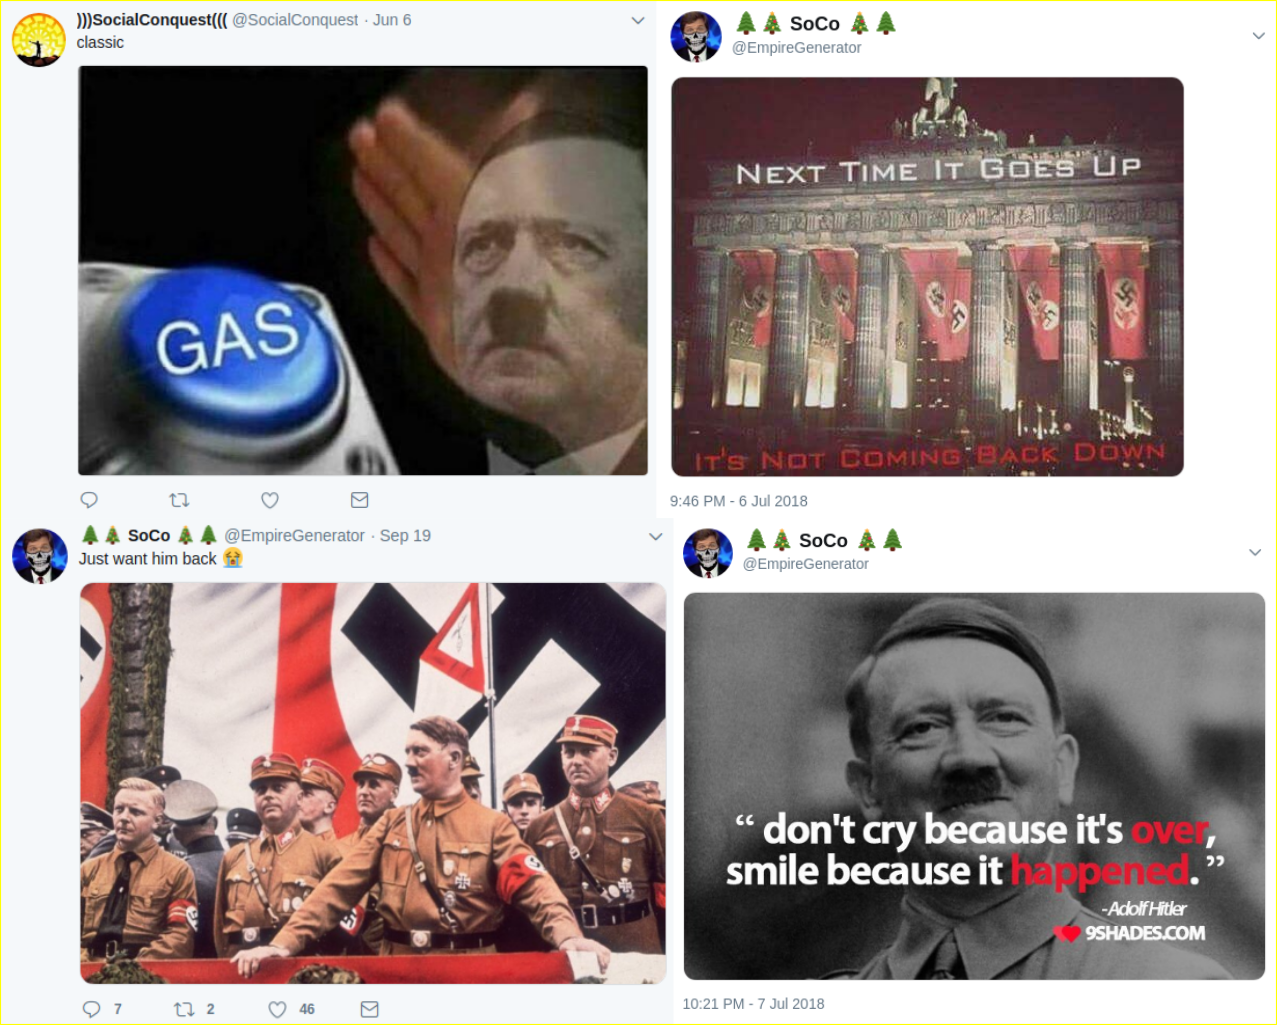 Matt Blais idolizes Hitler and expresses his hope and intention of recreating Nazi Germany in the present day